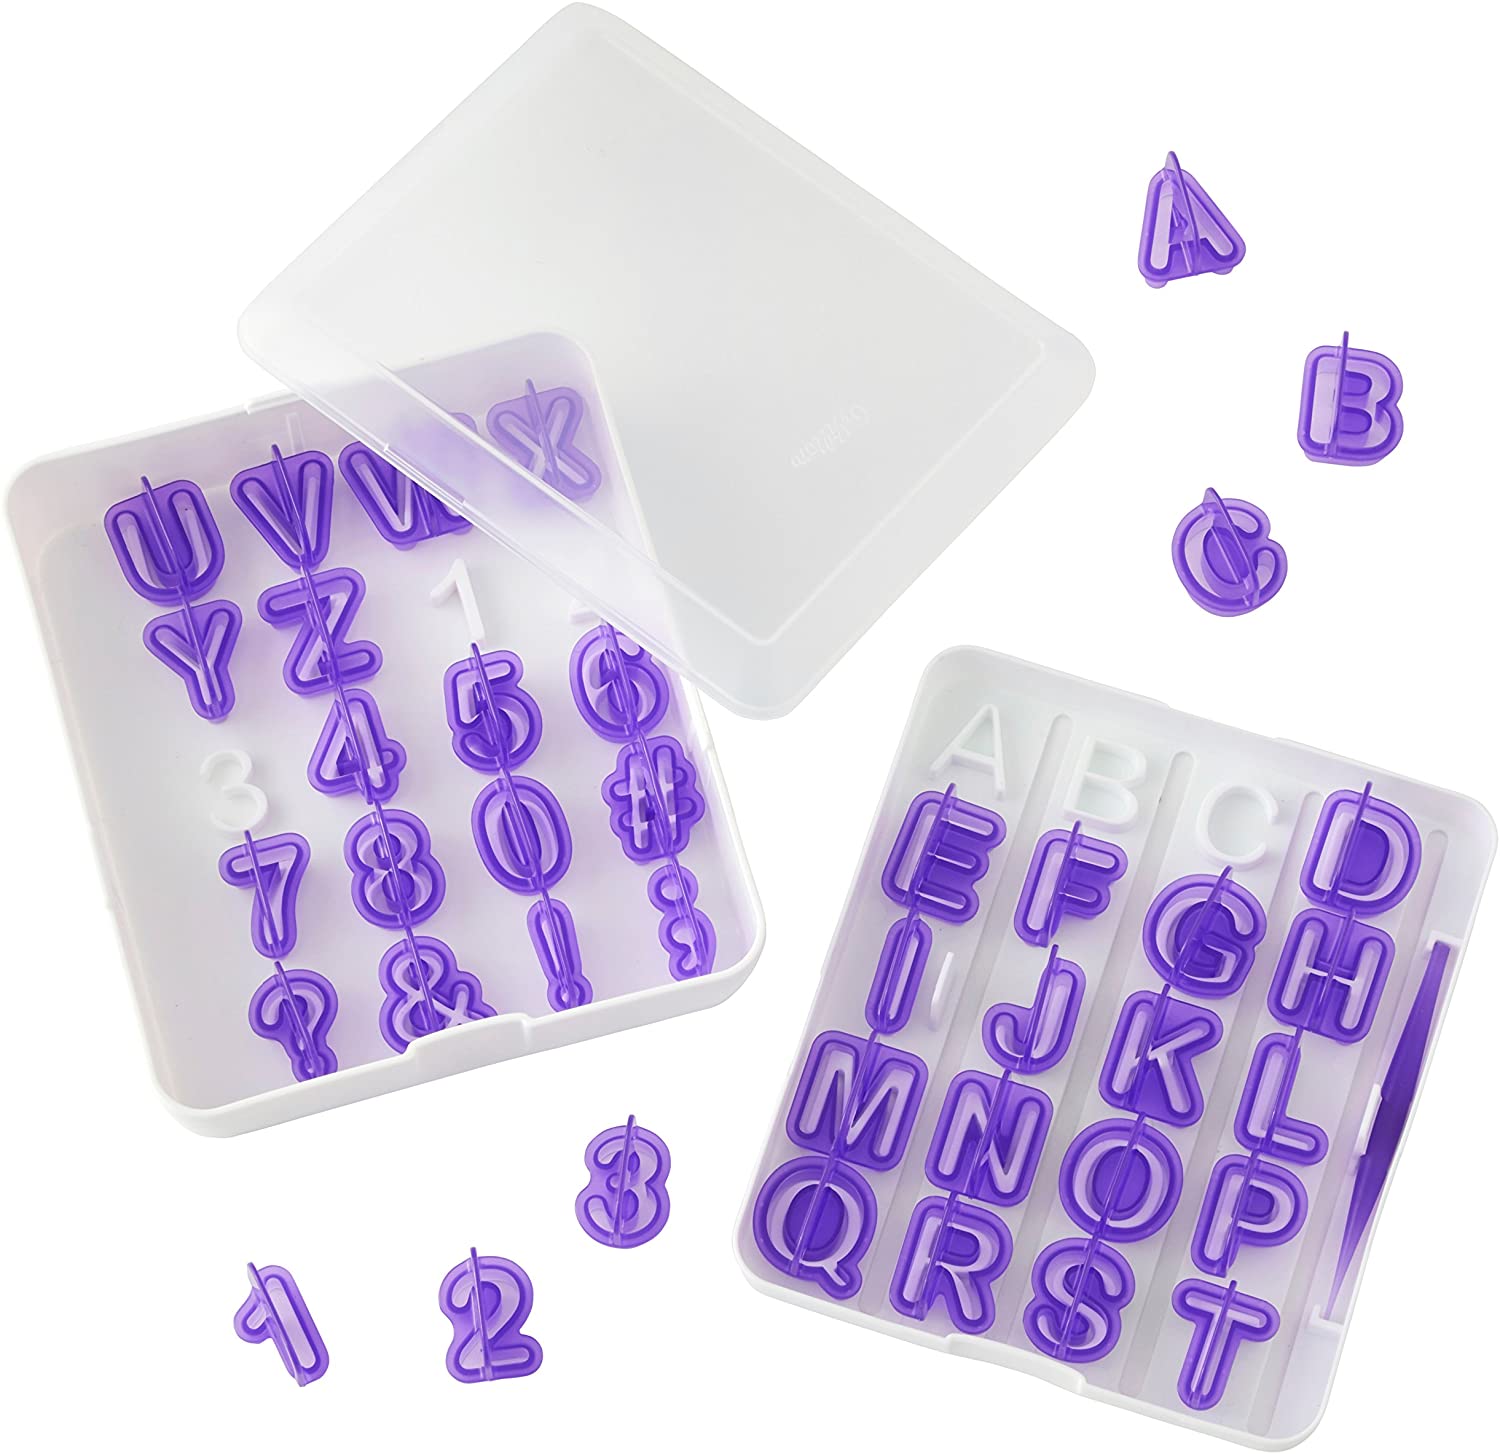 Wilton 40 Piece Fondant Letter and Number Cookie Cutter Set